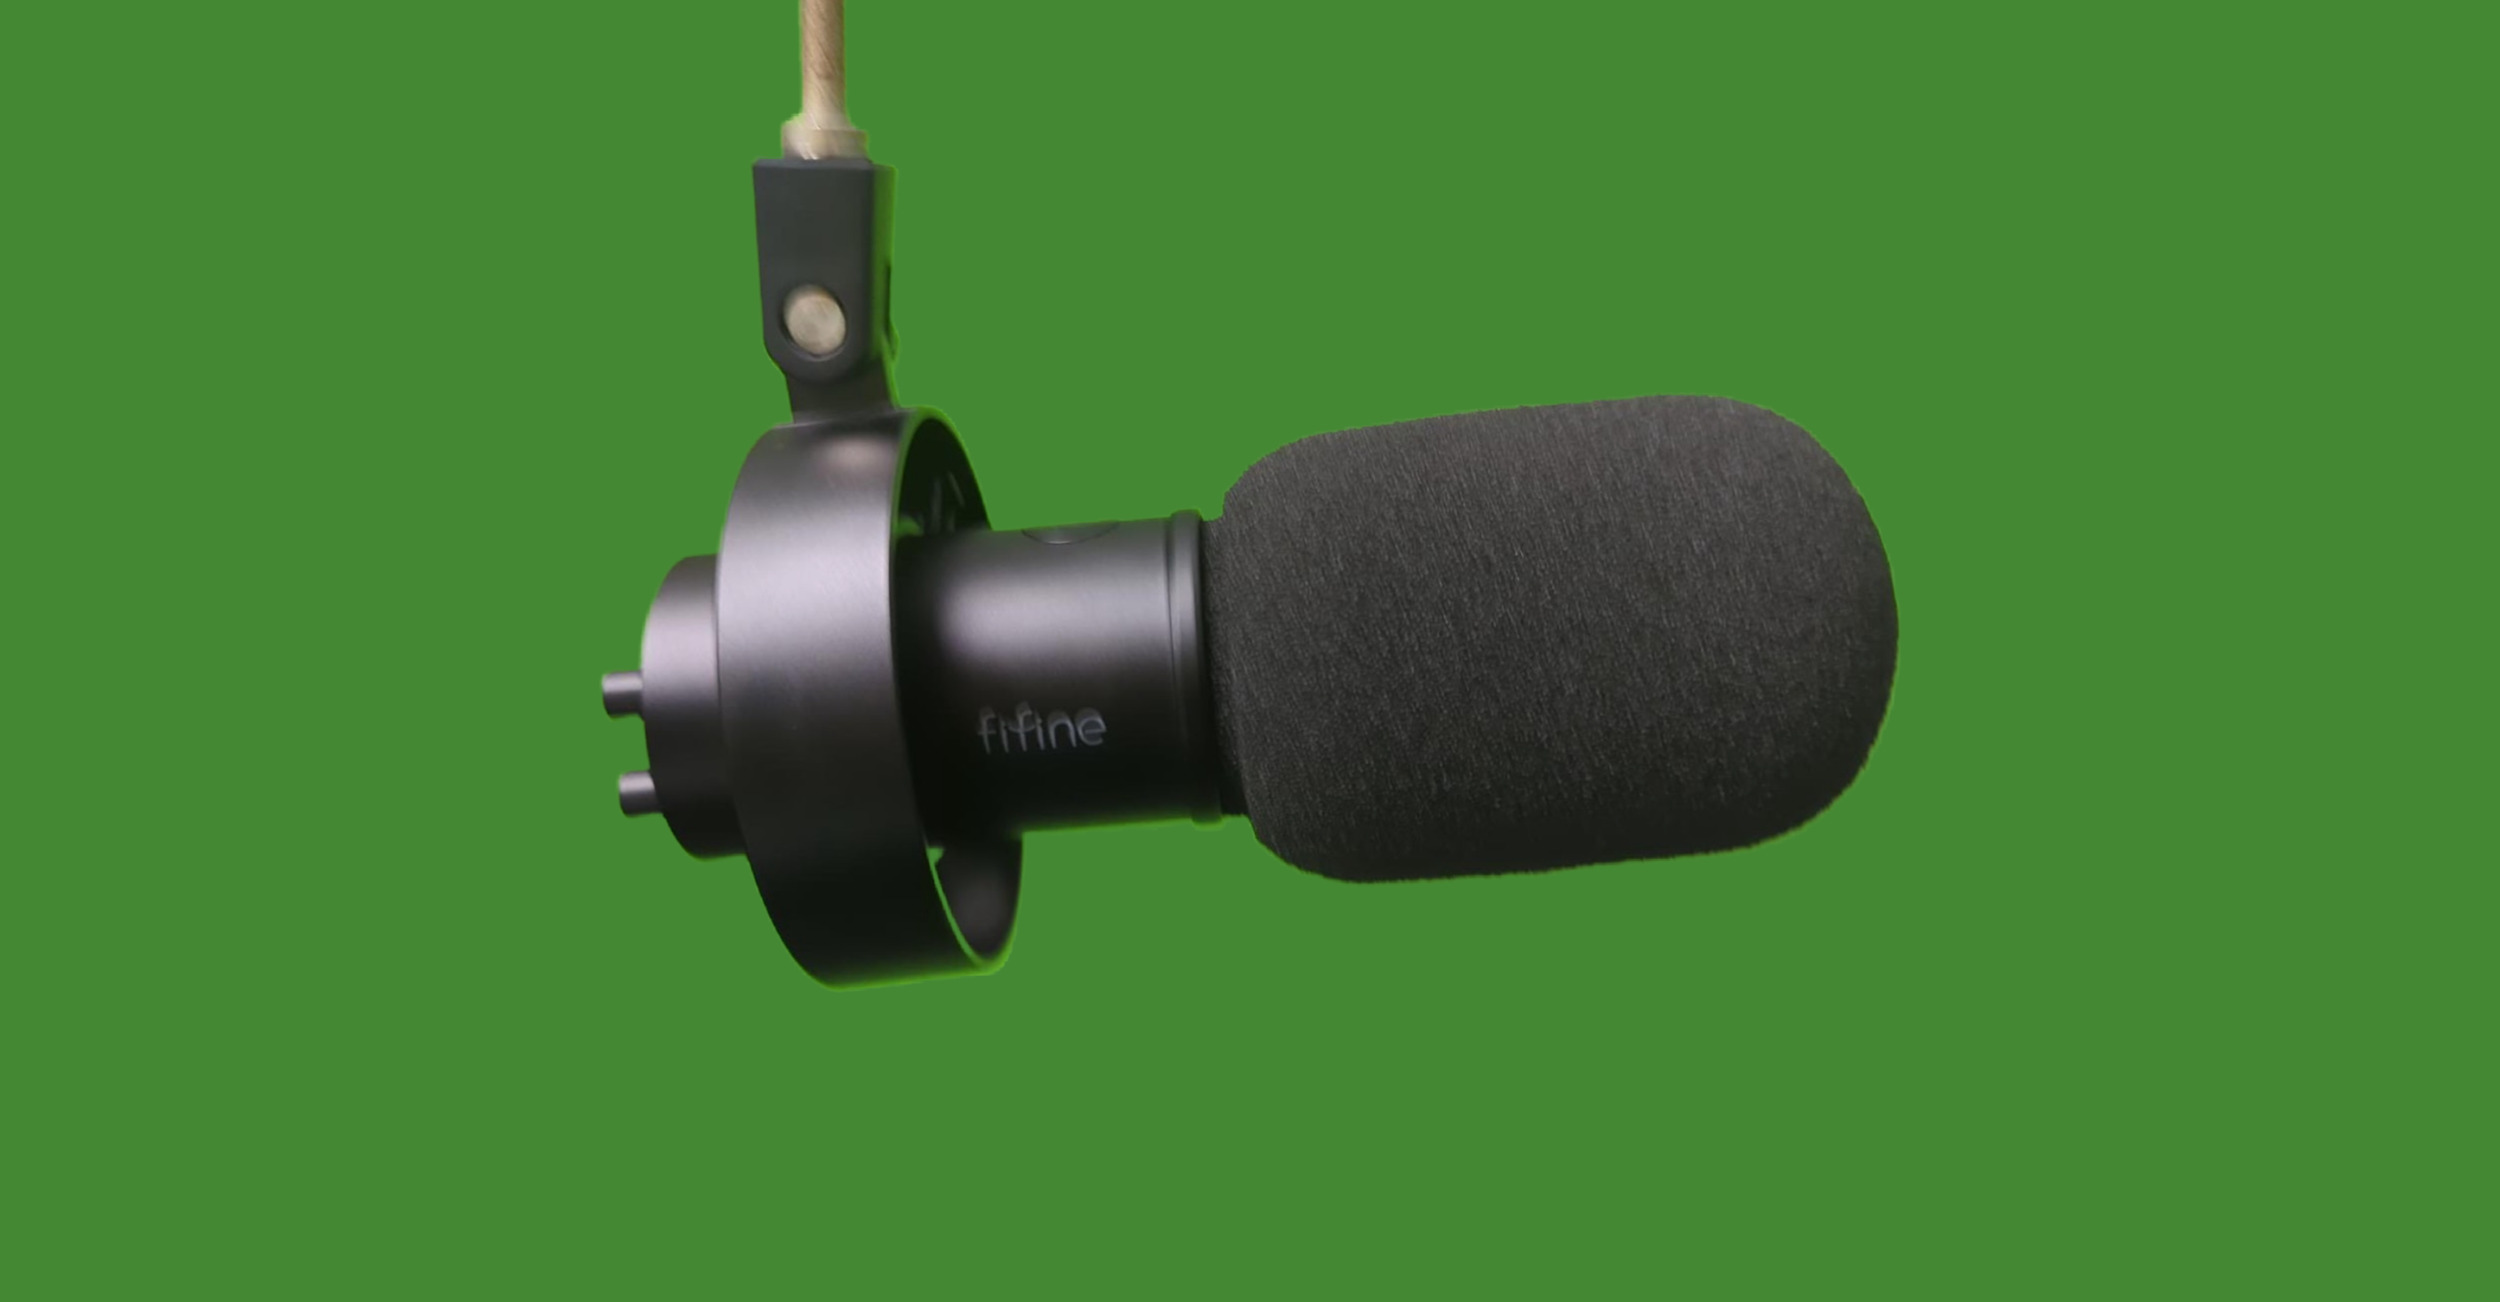 Here is the Fifine K688 dynamic microphone. This is a USB/XLR Mic that